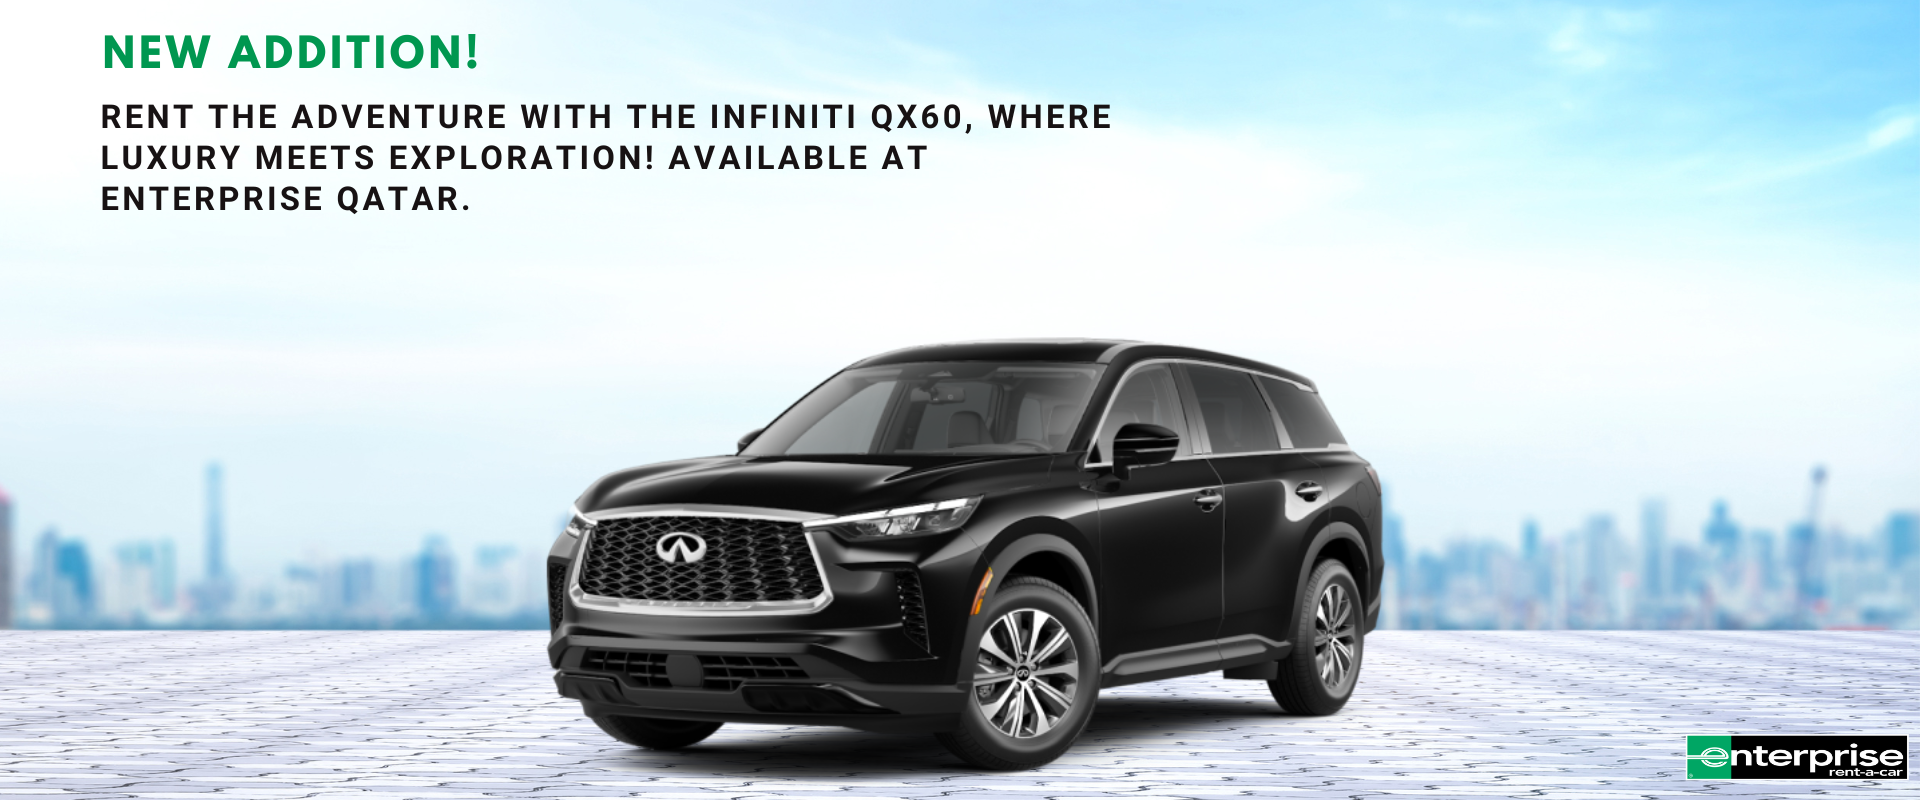 Rent the Adventure with the Infiniti QX60, where luxury meets exploration available in Enterprise Qatar.